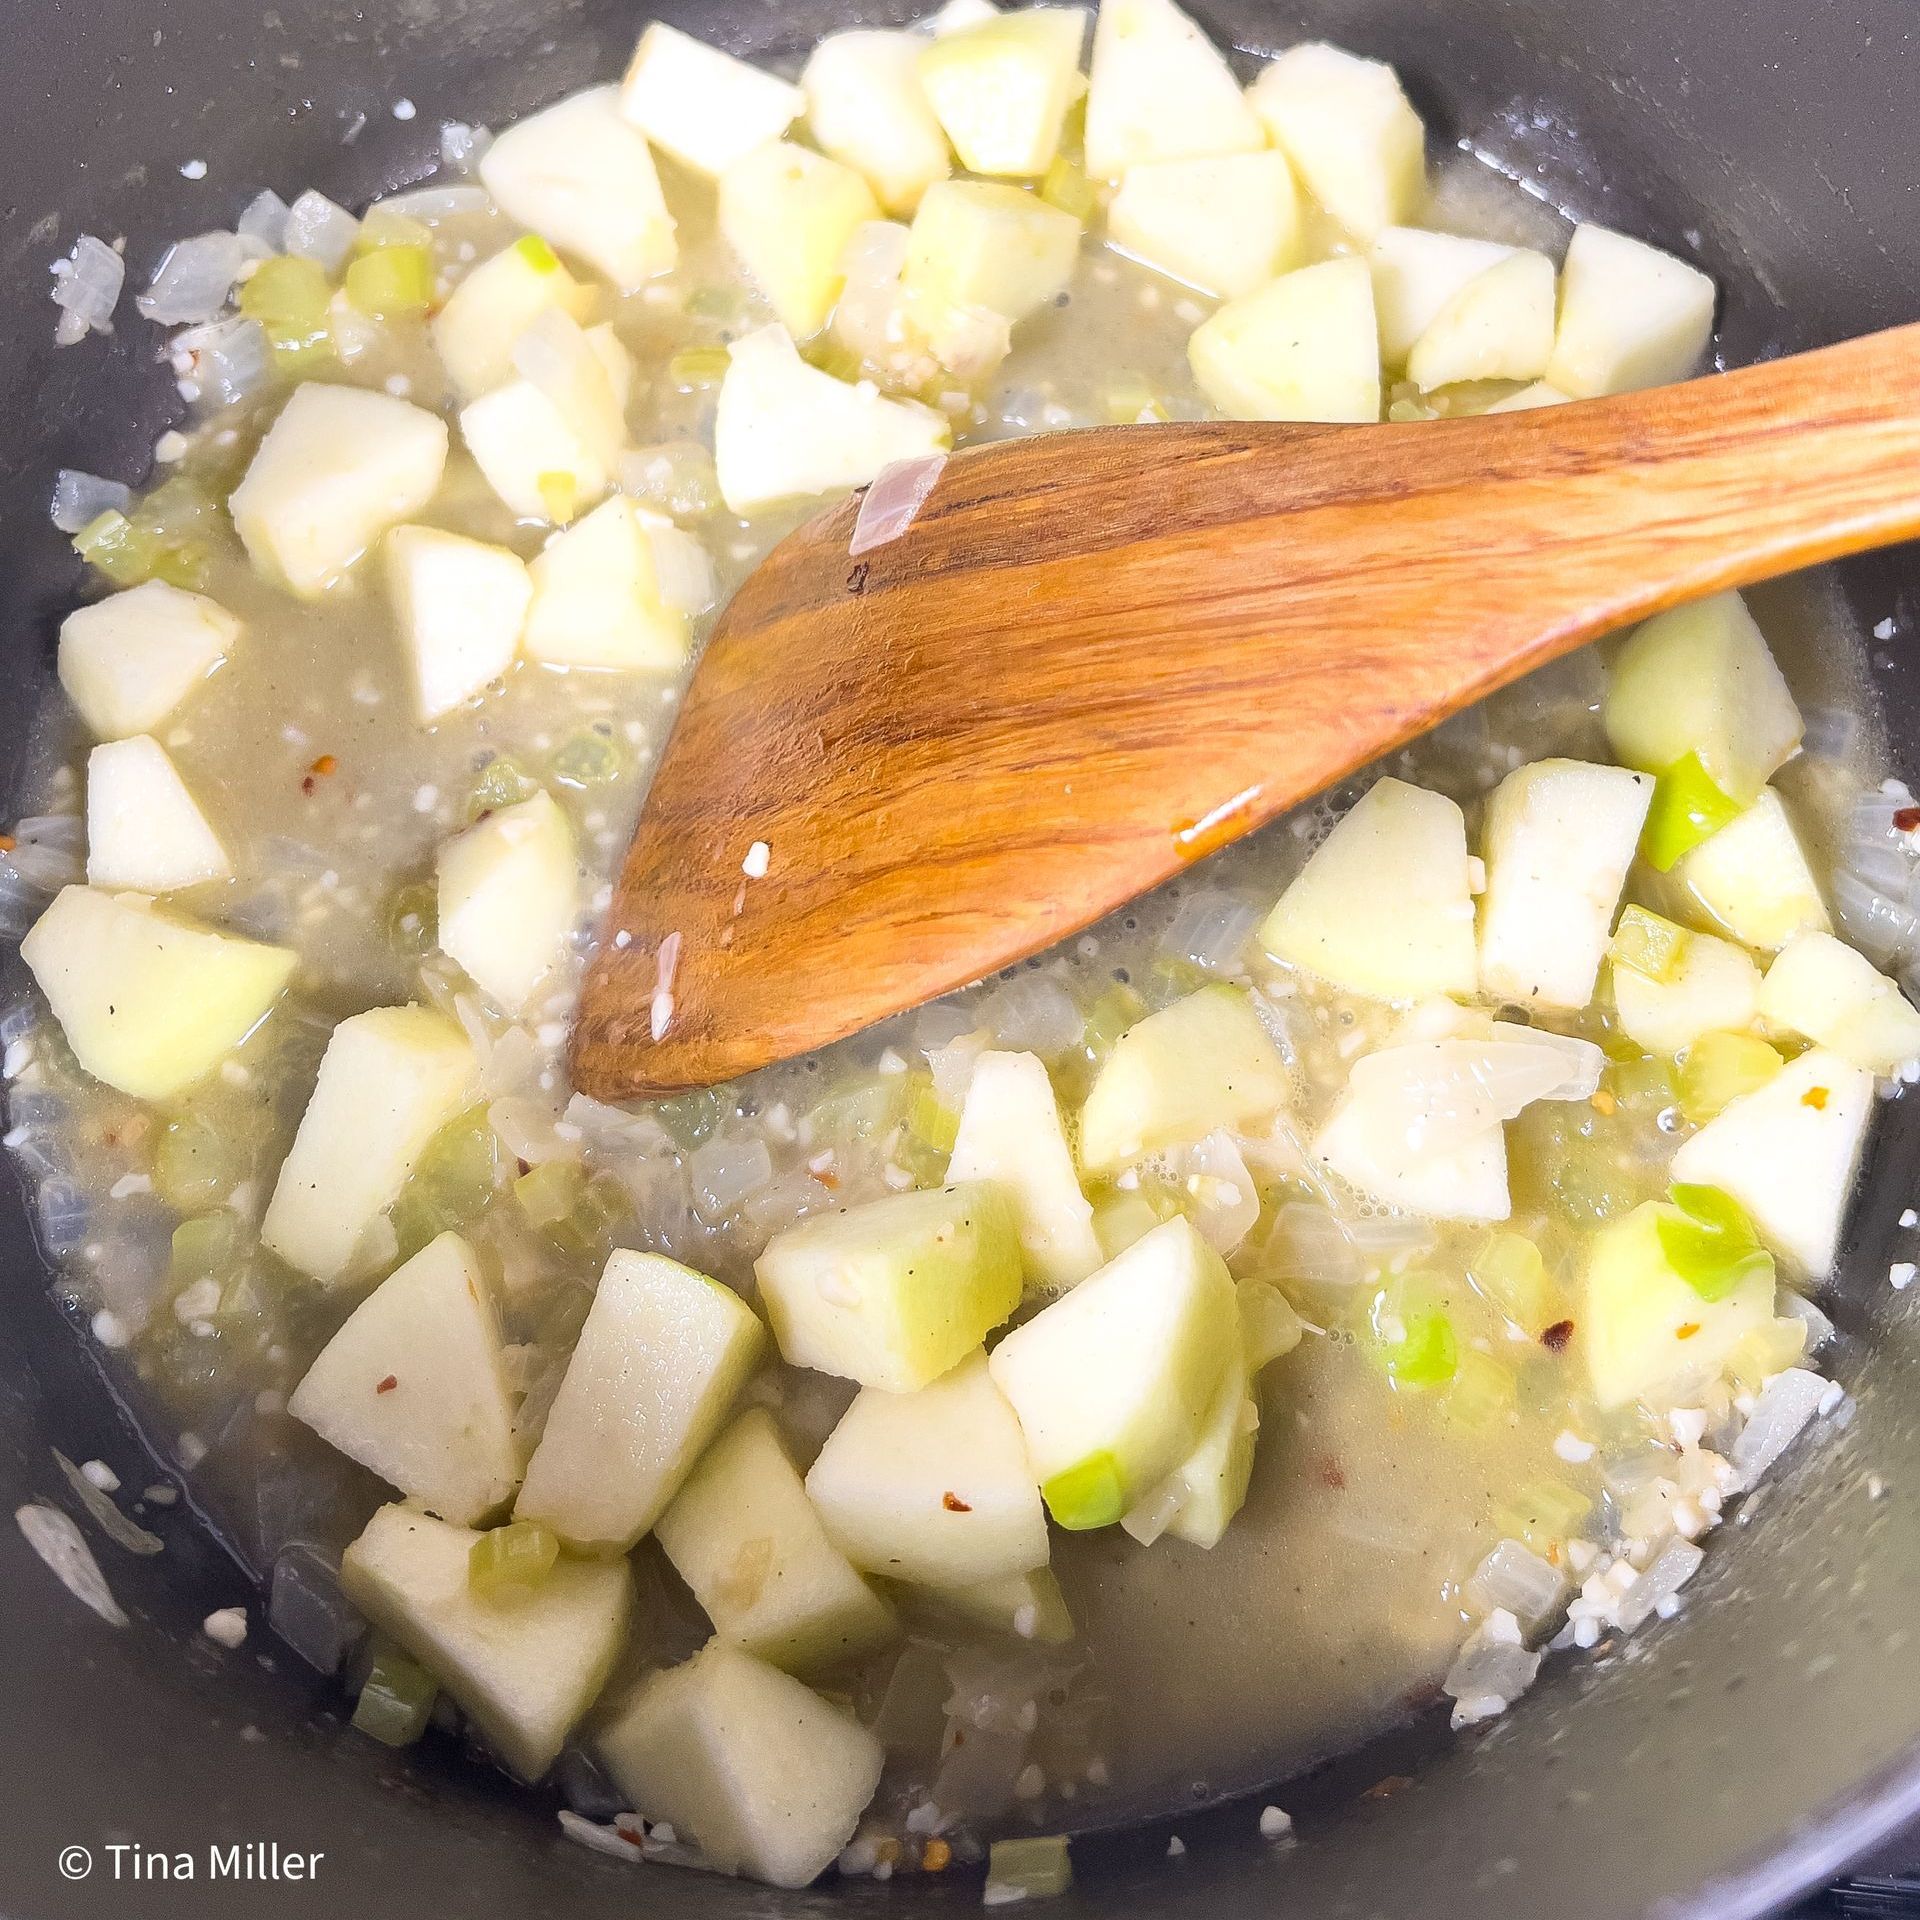 Dutch oven Granny Smith apples simmering in with white wine, sauteed onion, celery, garlic, ginger, and seasoning.